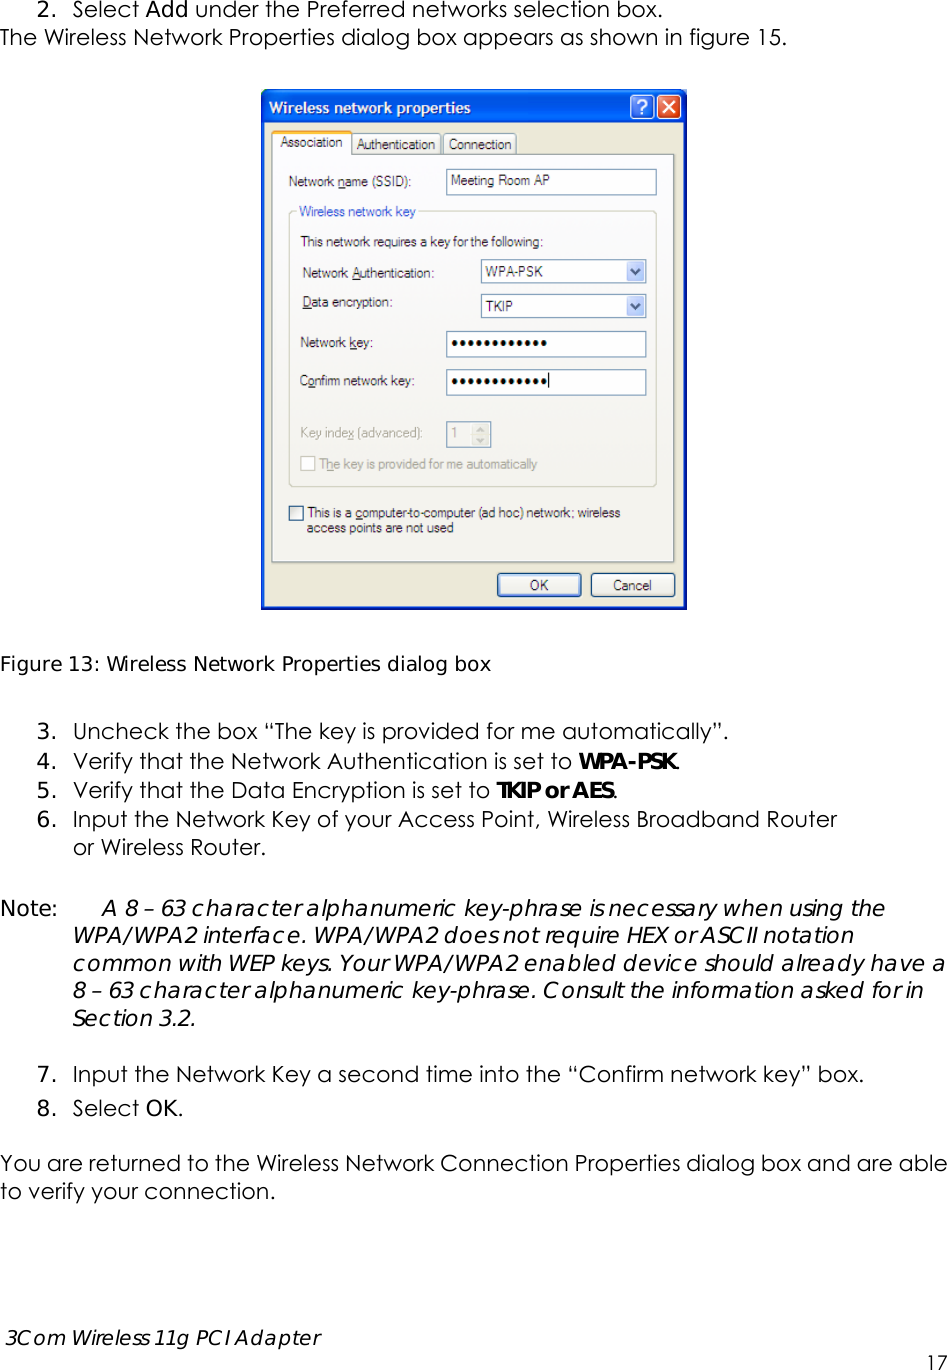      3Com Wireless 11g PCI Adapter     17  2. Select Add under the Preferred networks selection box.   The Wireless Network Properties dialog box appears as shown in figure 15.    Figure 13: Wireless Network Properties dialog box  3. Uncheck the box “The key is provided for me automatically”. 4. Verify that the Network Authentication is set to WPA-PSK. 5. Verify that the Data Encryption is set to TKIP or AES. 6. Input the Network Key of your Access Point, Wireless Broadband Router   or Wireless Router.  Note:    A 8 – 63 character alphanumeric key-phrase is necessary when using the WPA/WPA2 interface. WPA/WPA2 does not require HEX or ASCII notation common with WEP keys. Your WPA/WPA2 enabled device should already have a 8 – 63 character alphanumeric key-phrase. Consult the information asked for in Section 3.2.  7. Input the Network Key a second time into the “Confirm network key” box. 8. Select OK.  You are returned to the Wireless Network Connection Properties dialog box and are able to verify your connection.    